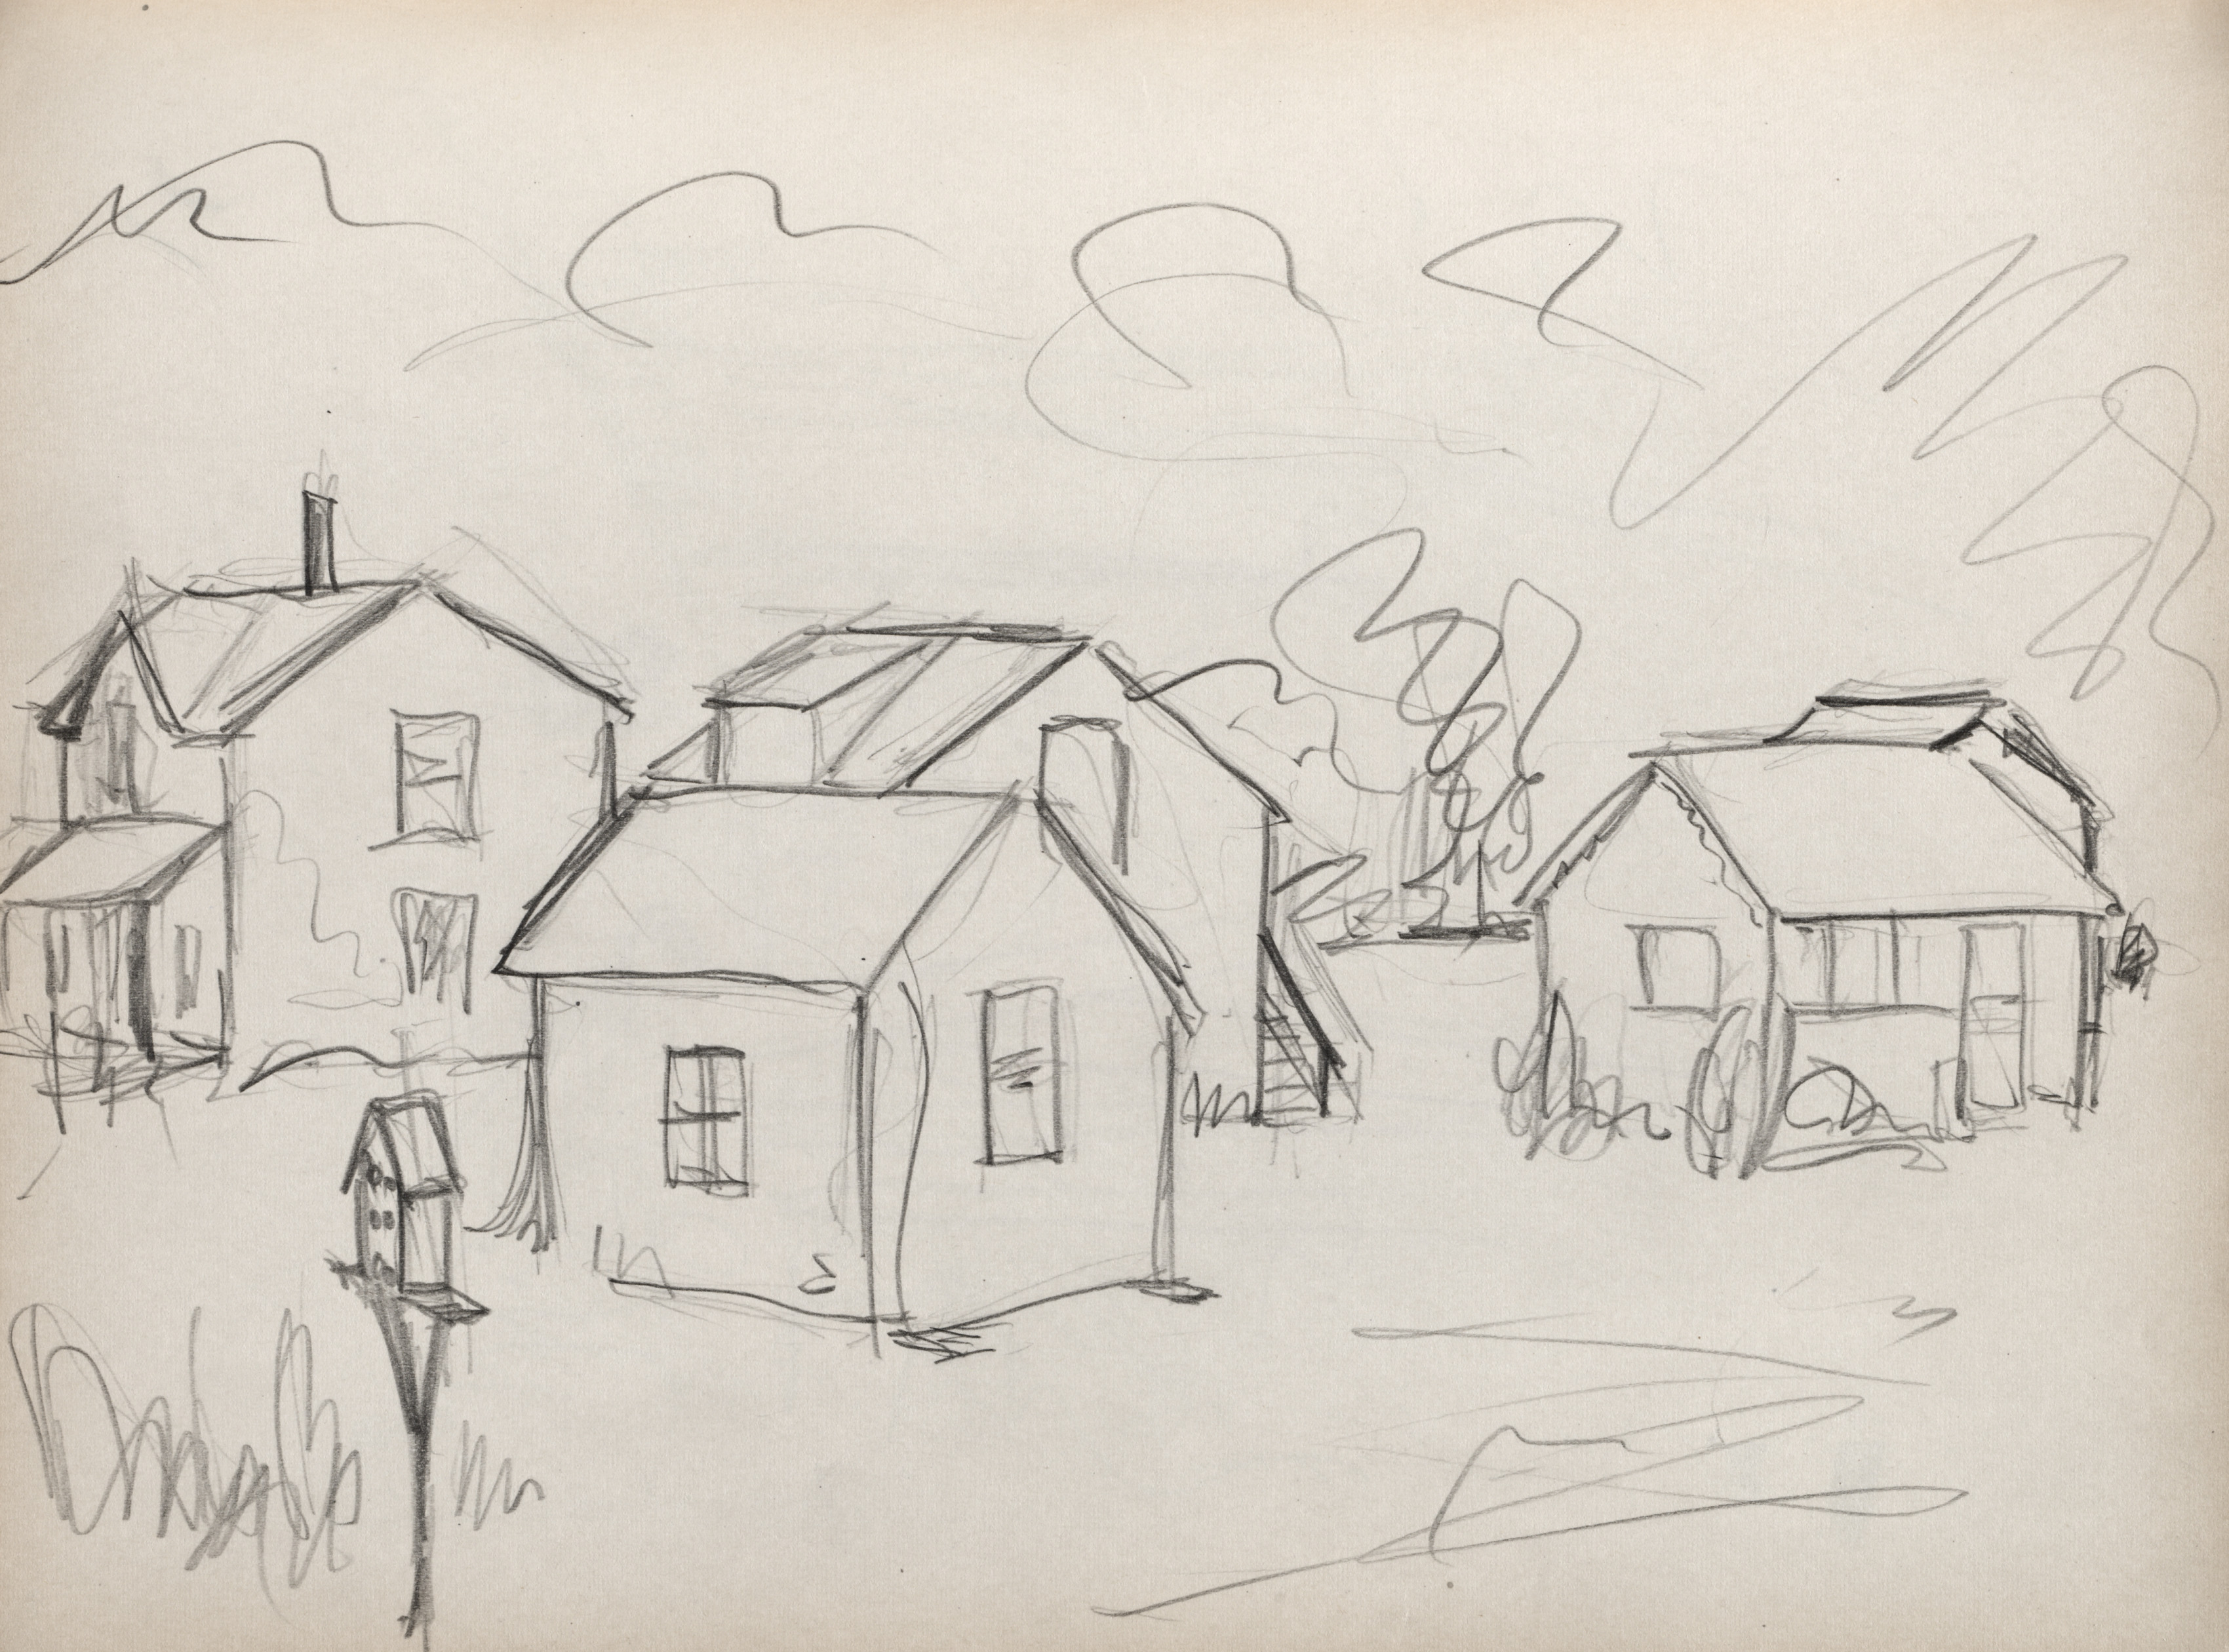 Sketchbook No. 2, page 135: Houses and birdhouse